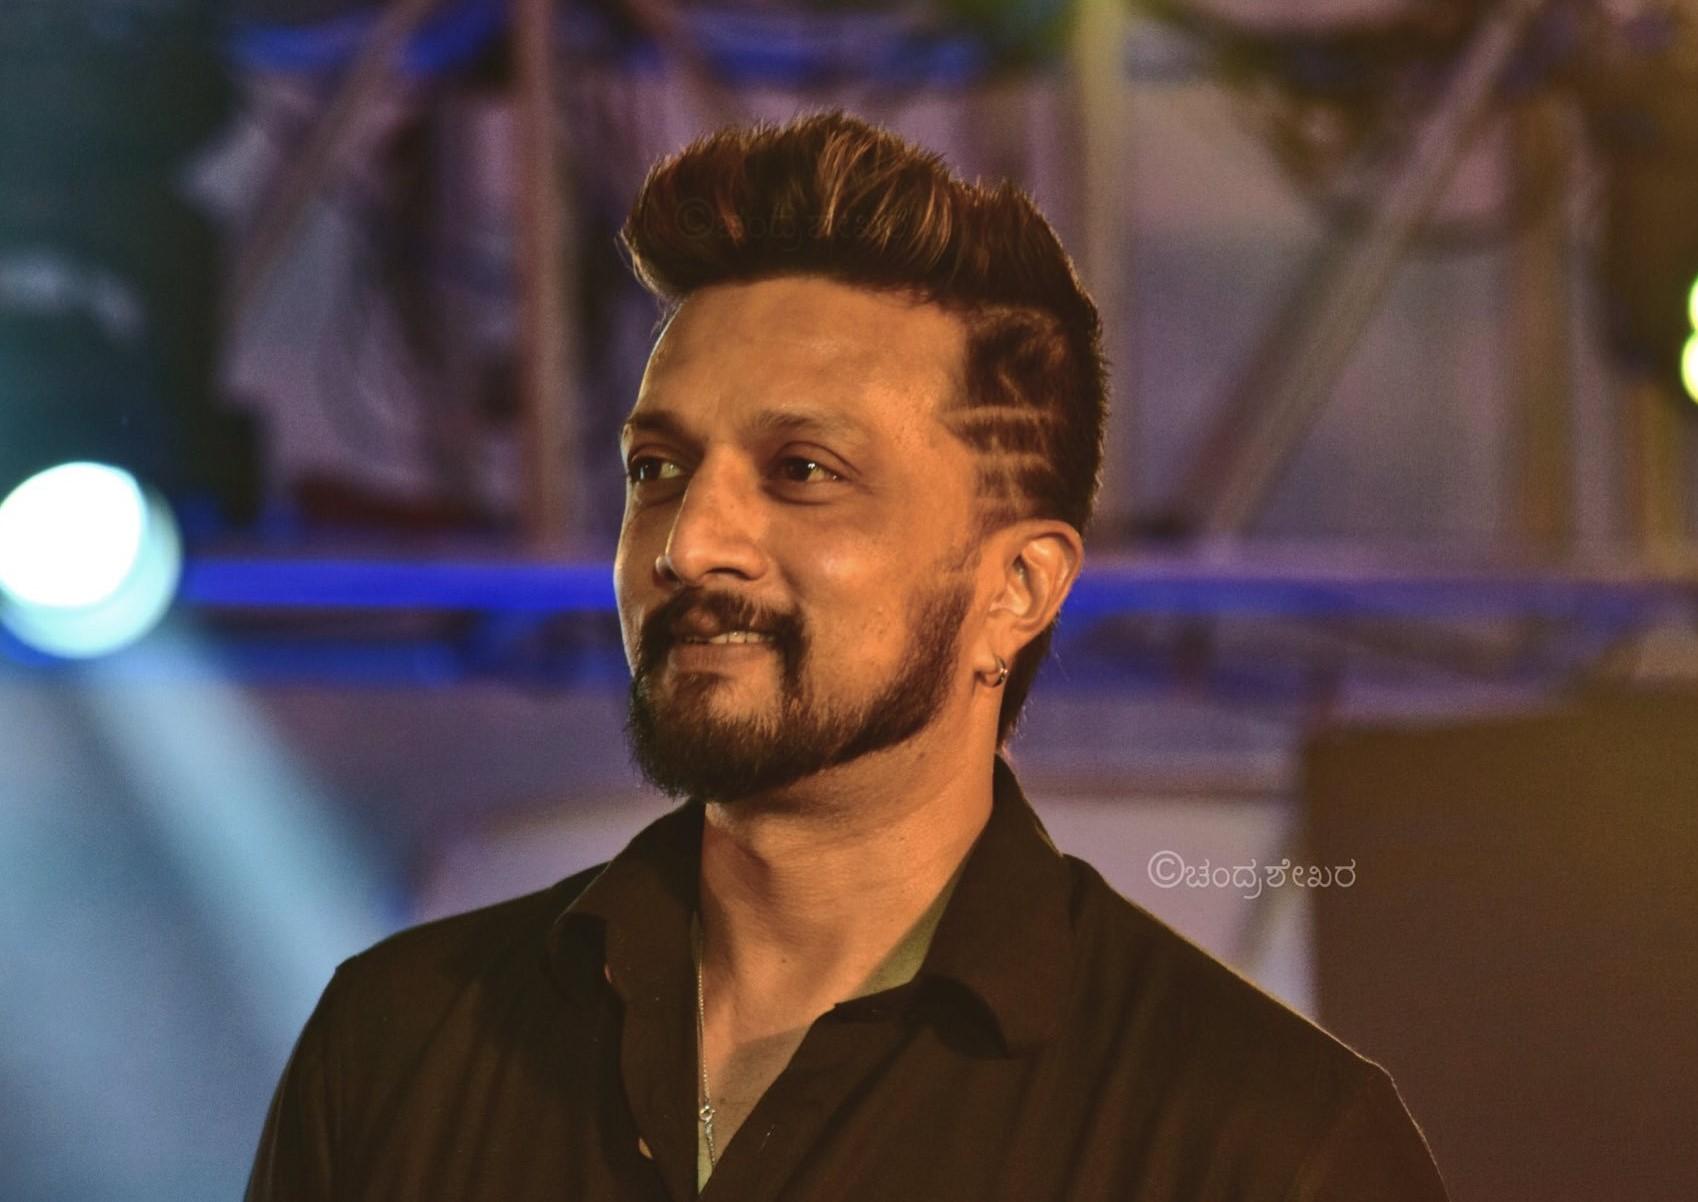 Kiccha Sudeep Talks About His Stardom | Kiccha Sudeep talks about stardom  in the South while also revealing the craziest things that fan ha e done  for him. | By Curly Tales |